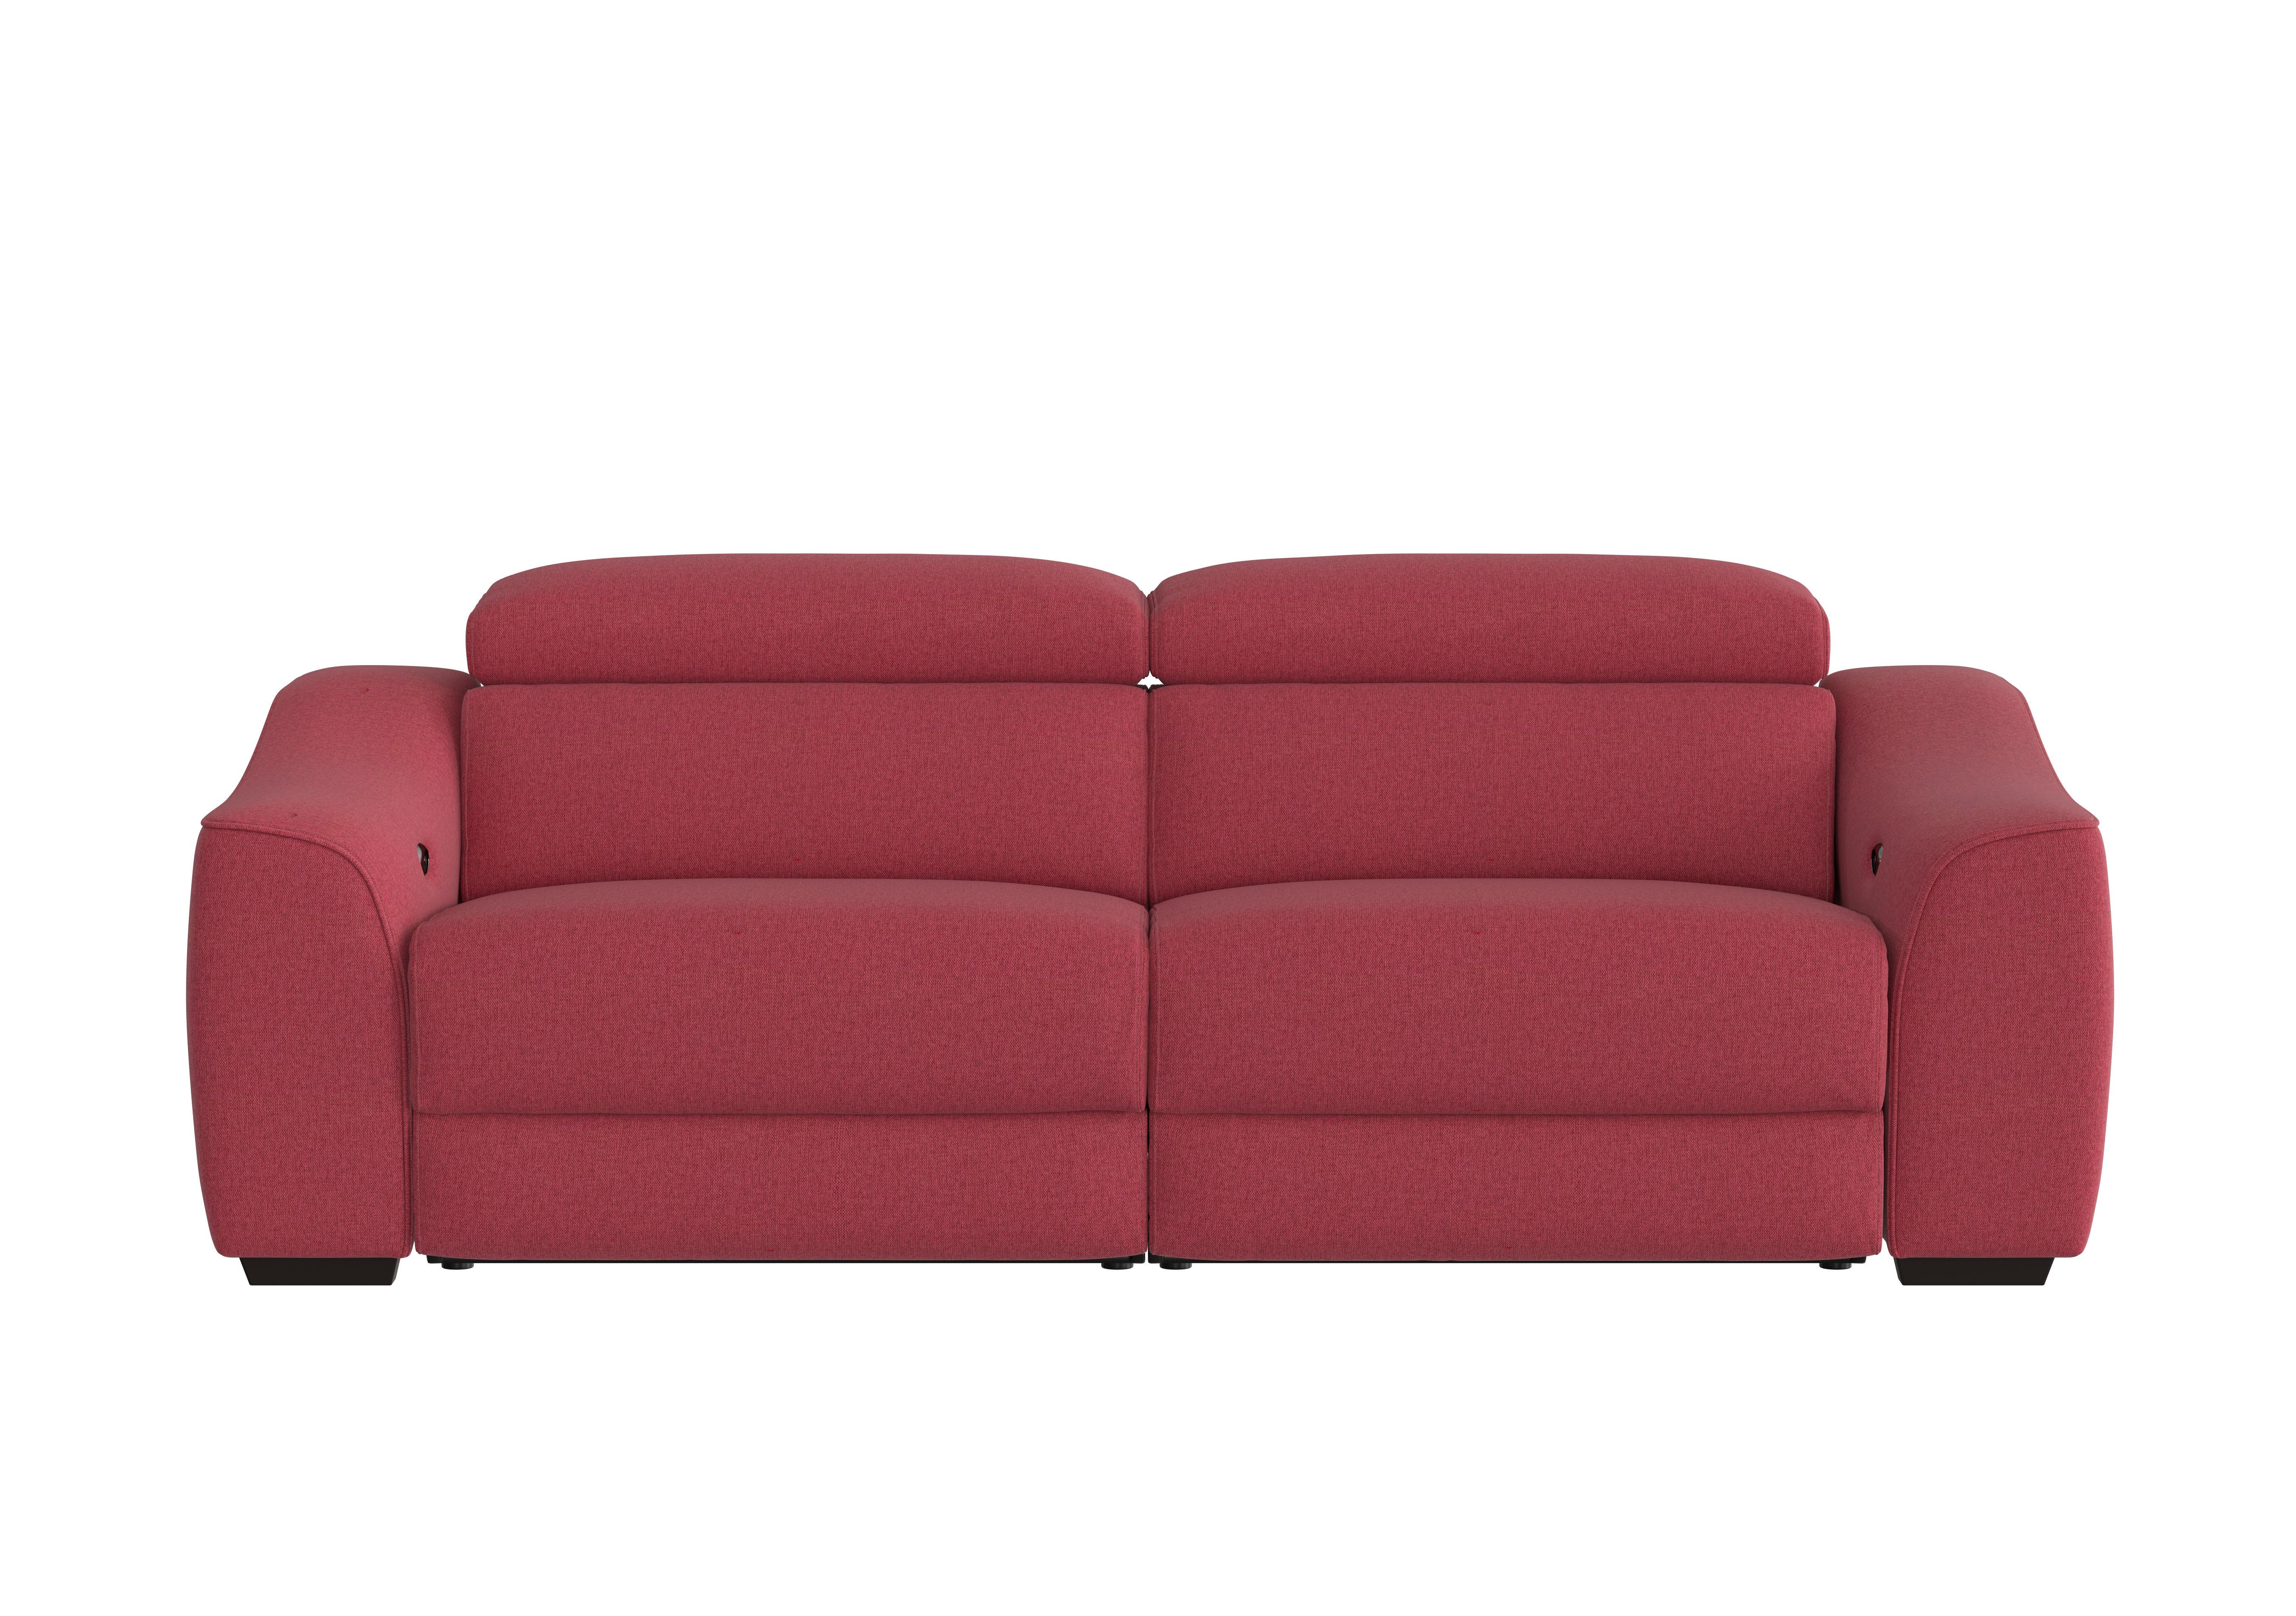 Elixir 3 Seater Fabric Sofa in Fab-Blt-R29 Red on Furniture Village